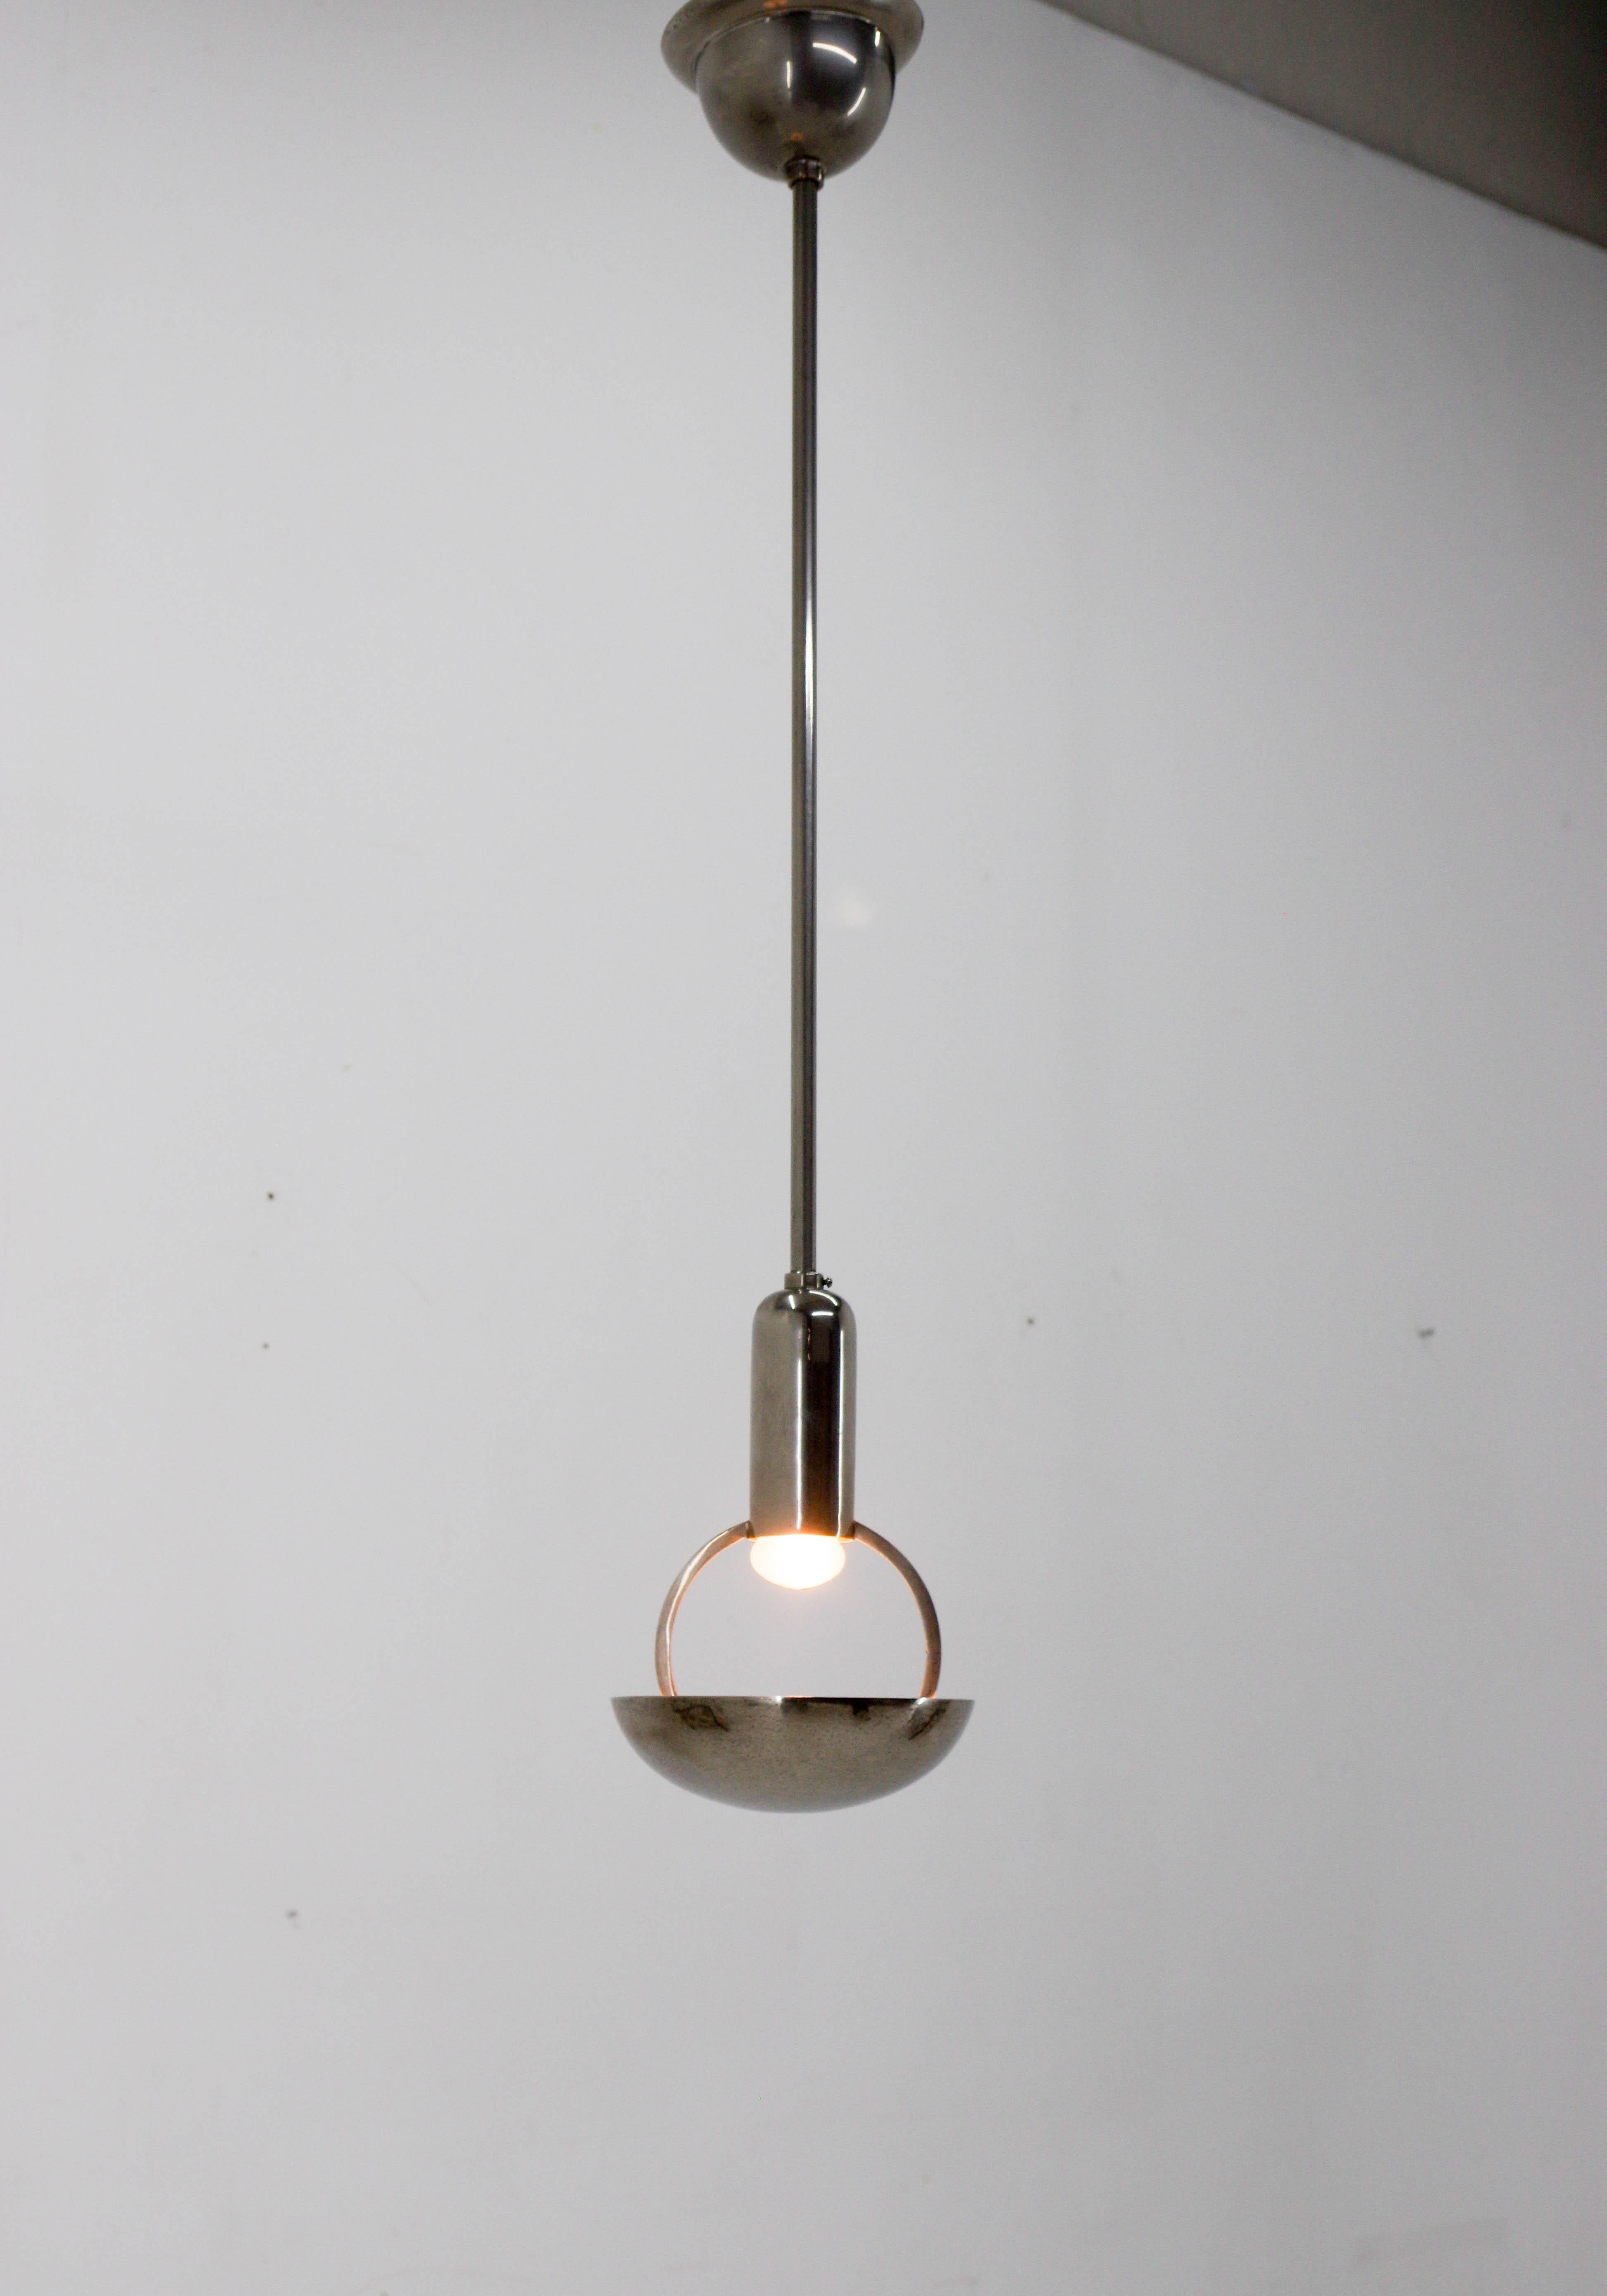 Rare Bauhaus pendant made in 1930s.
Minimalistic design.
Nickel-plating with minor age patina - polished
Central rod can be shorten on request.
Rewired: 1x60W, E24-E26 bulb
US wiring compatible